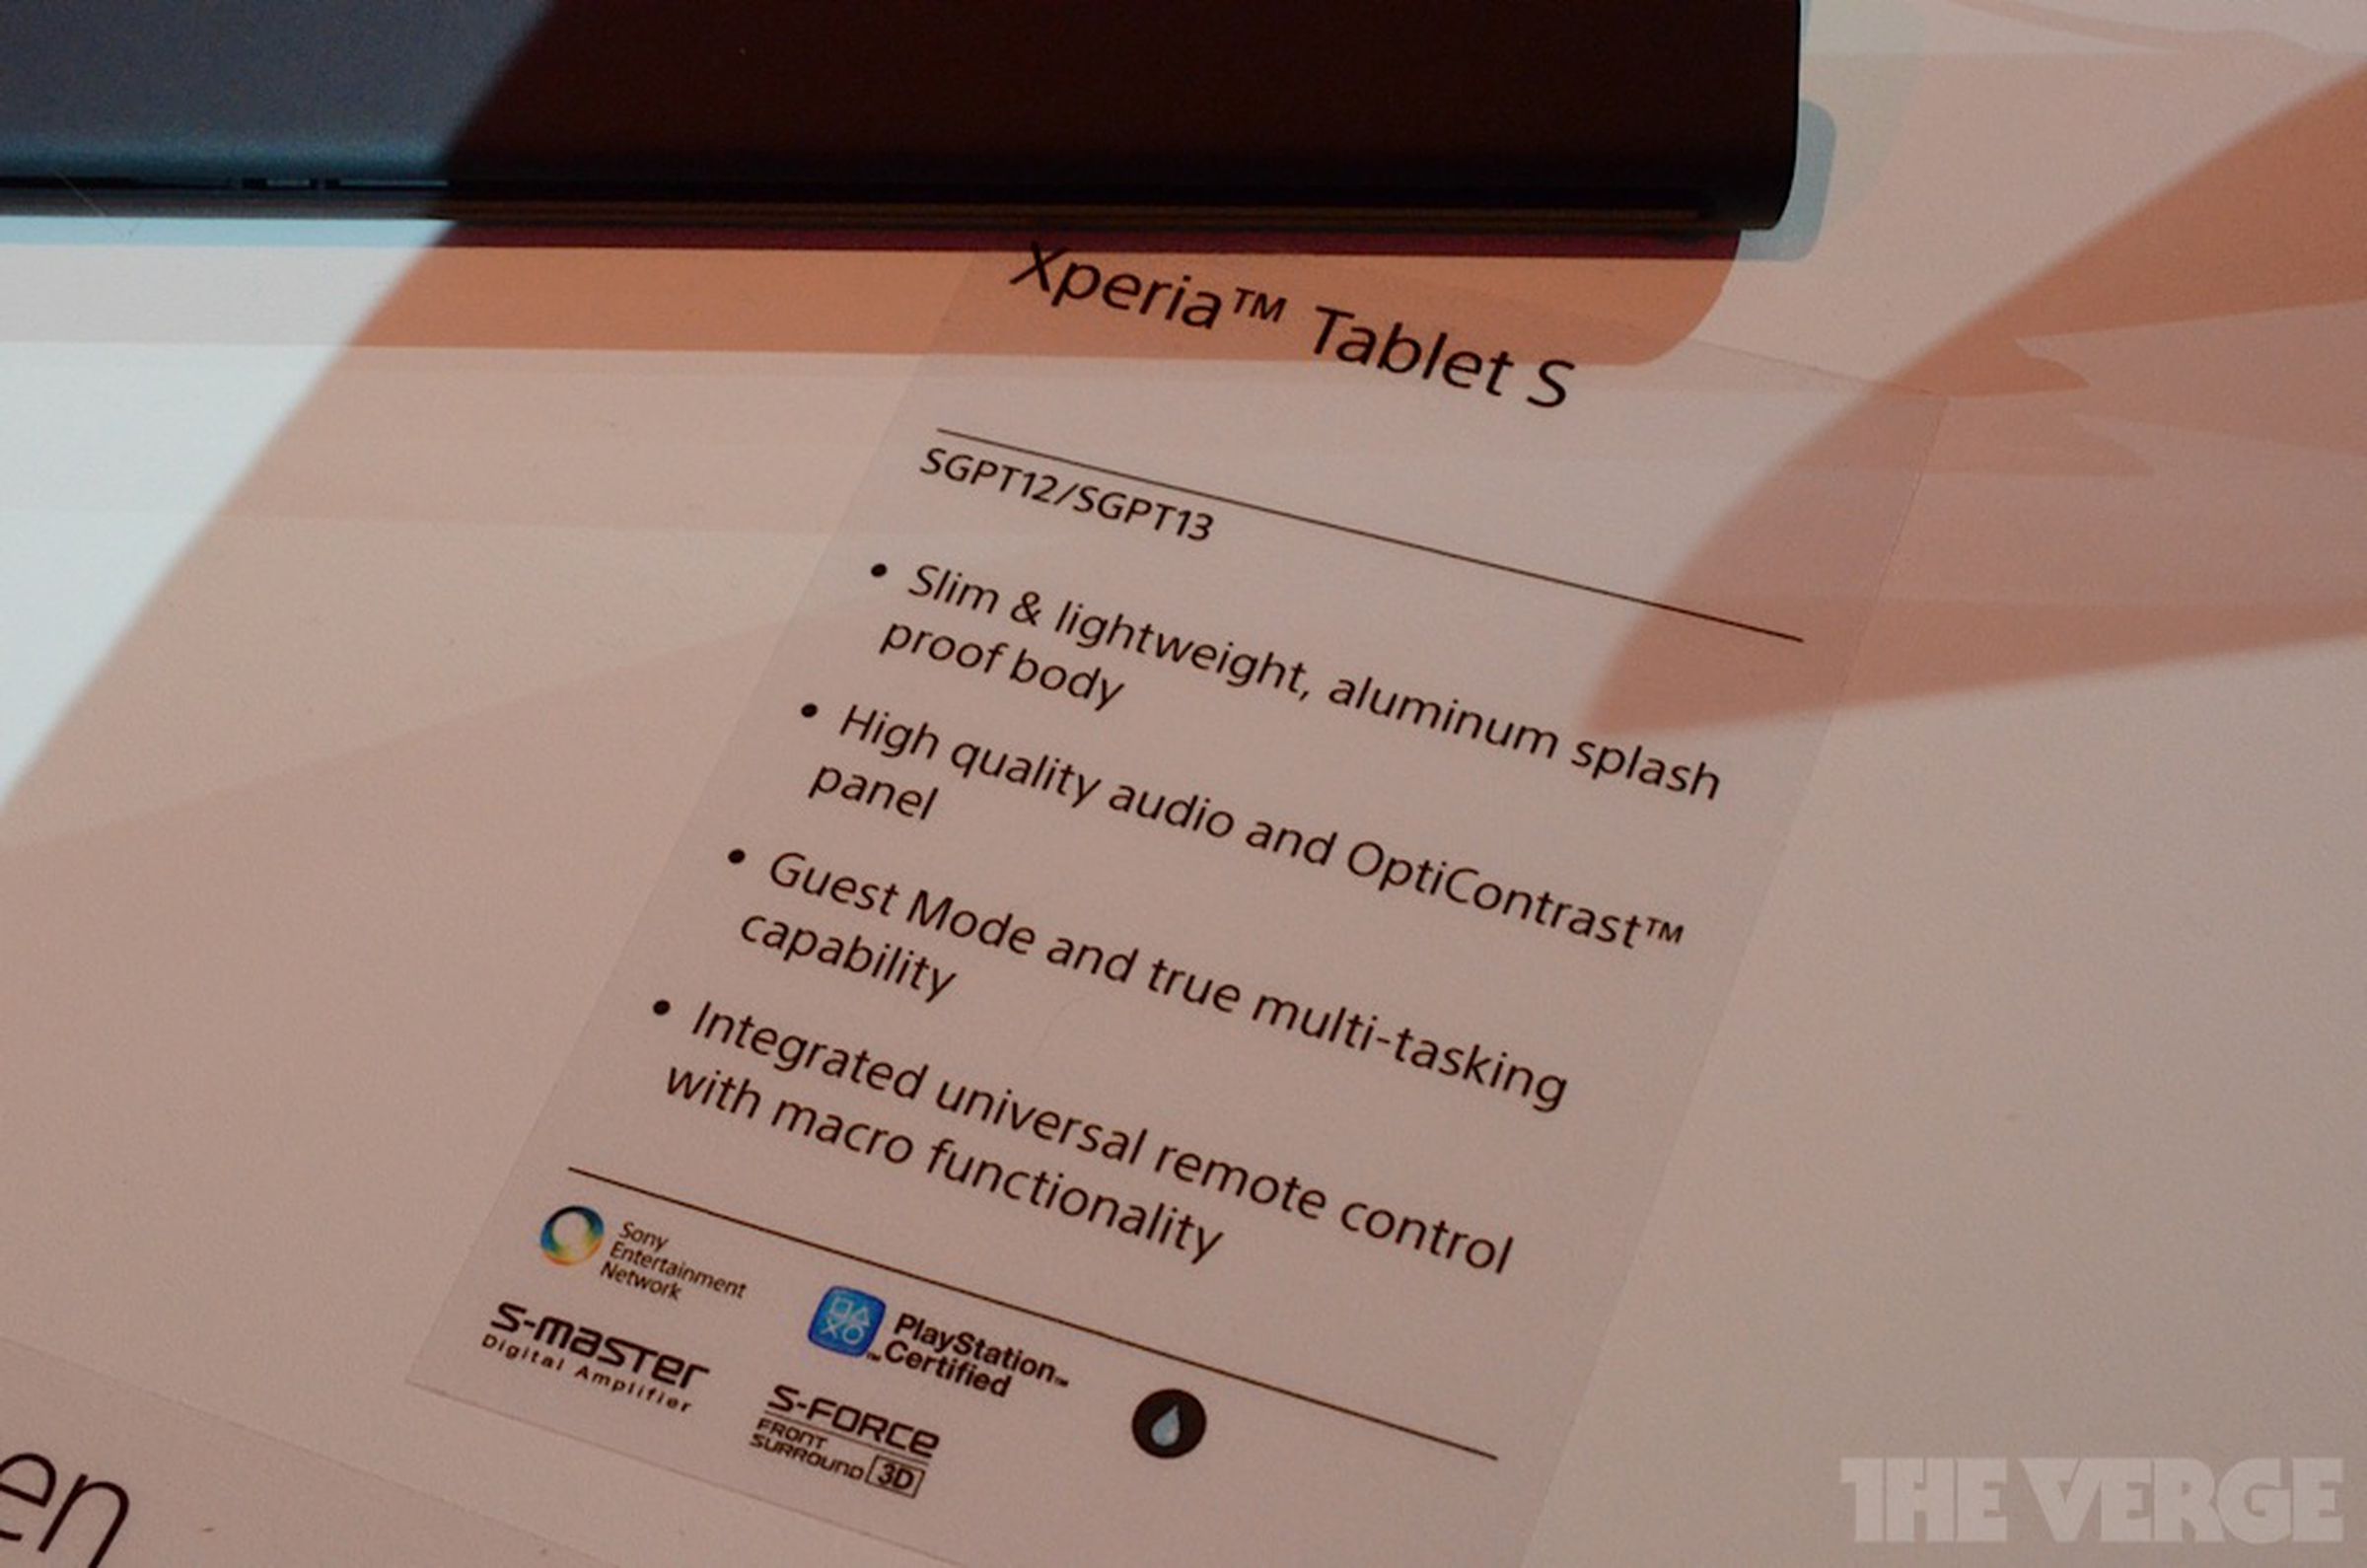 Sony Xperia Tablet S hands-on pictures from IFA 2012